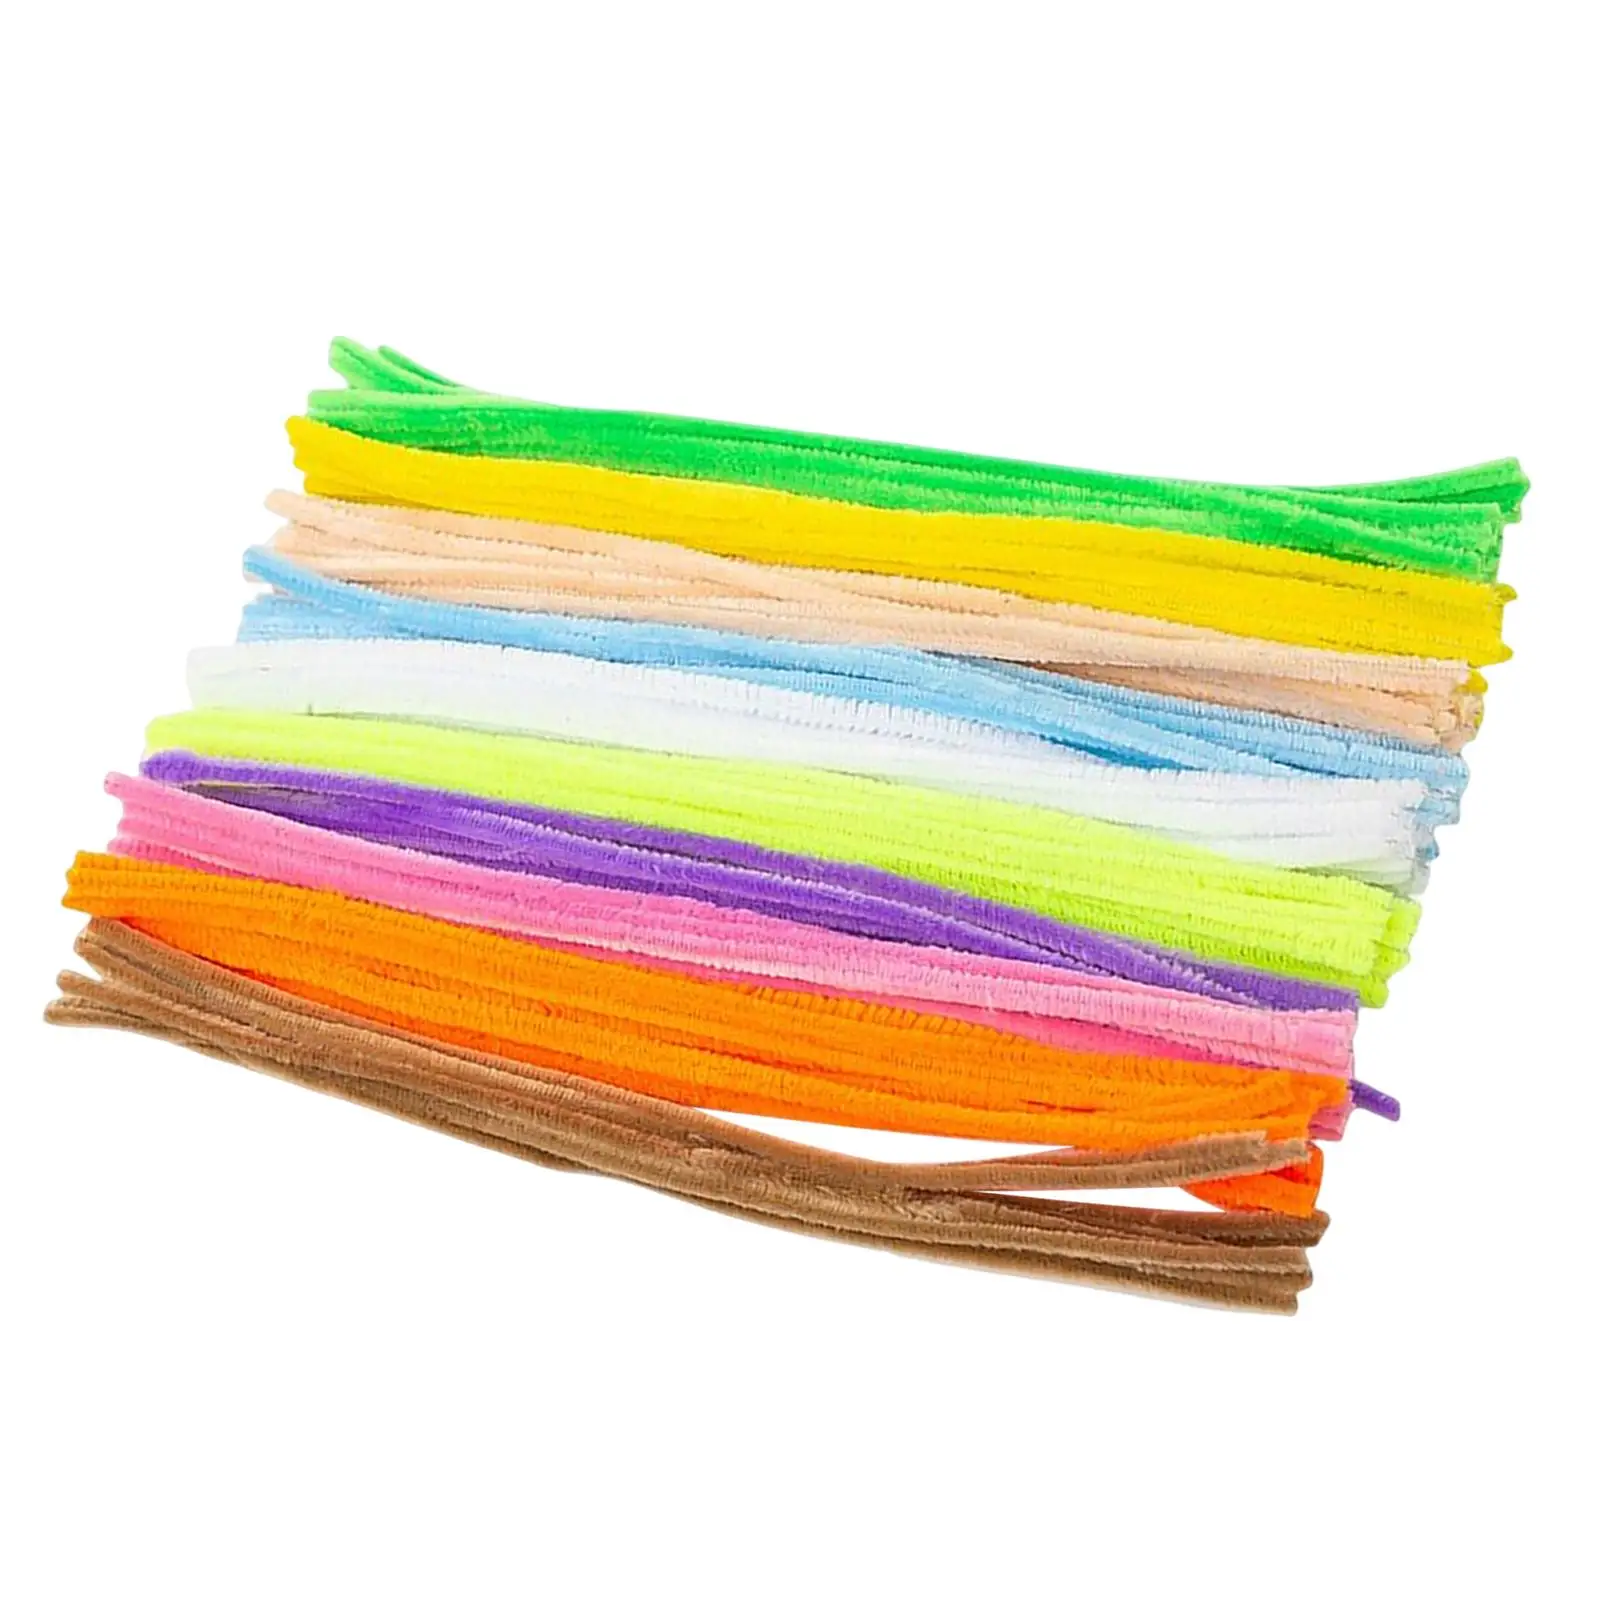 

100 Pieces Soft Twisting Bar Handmade Crafting Materials Colorful Educational Art Crafts Supplies for Parties Holiday Home